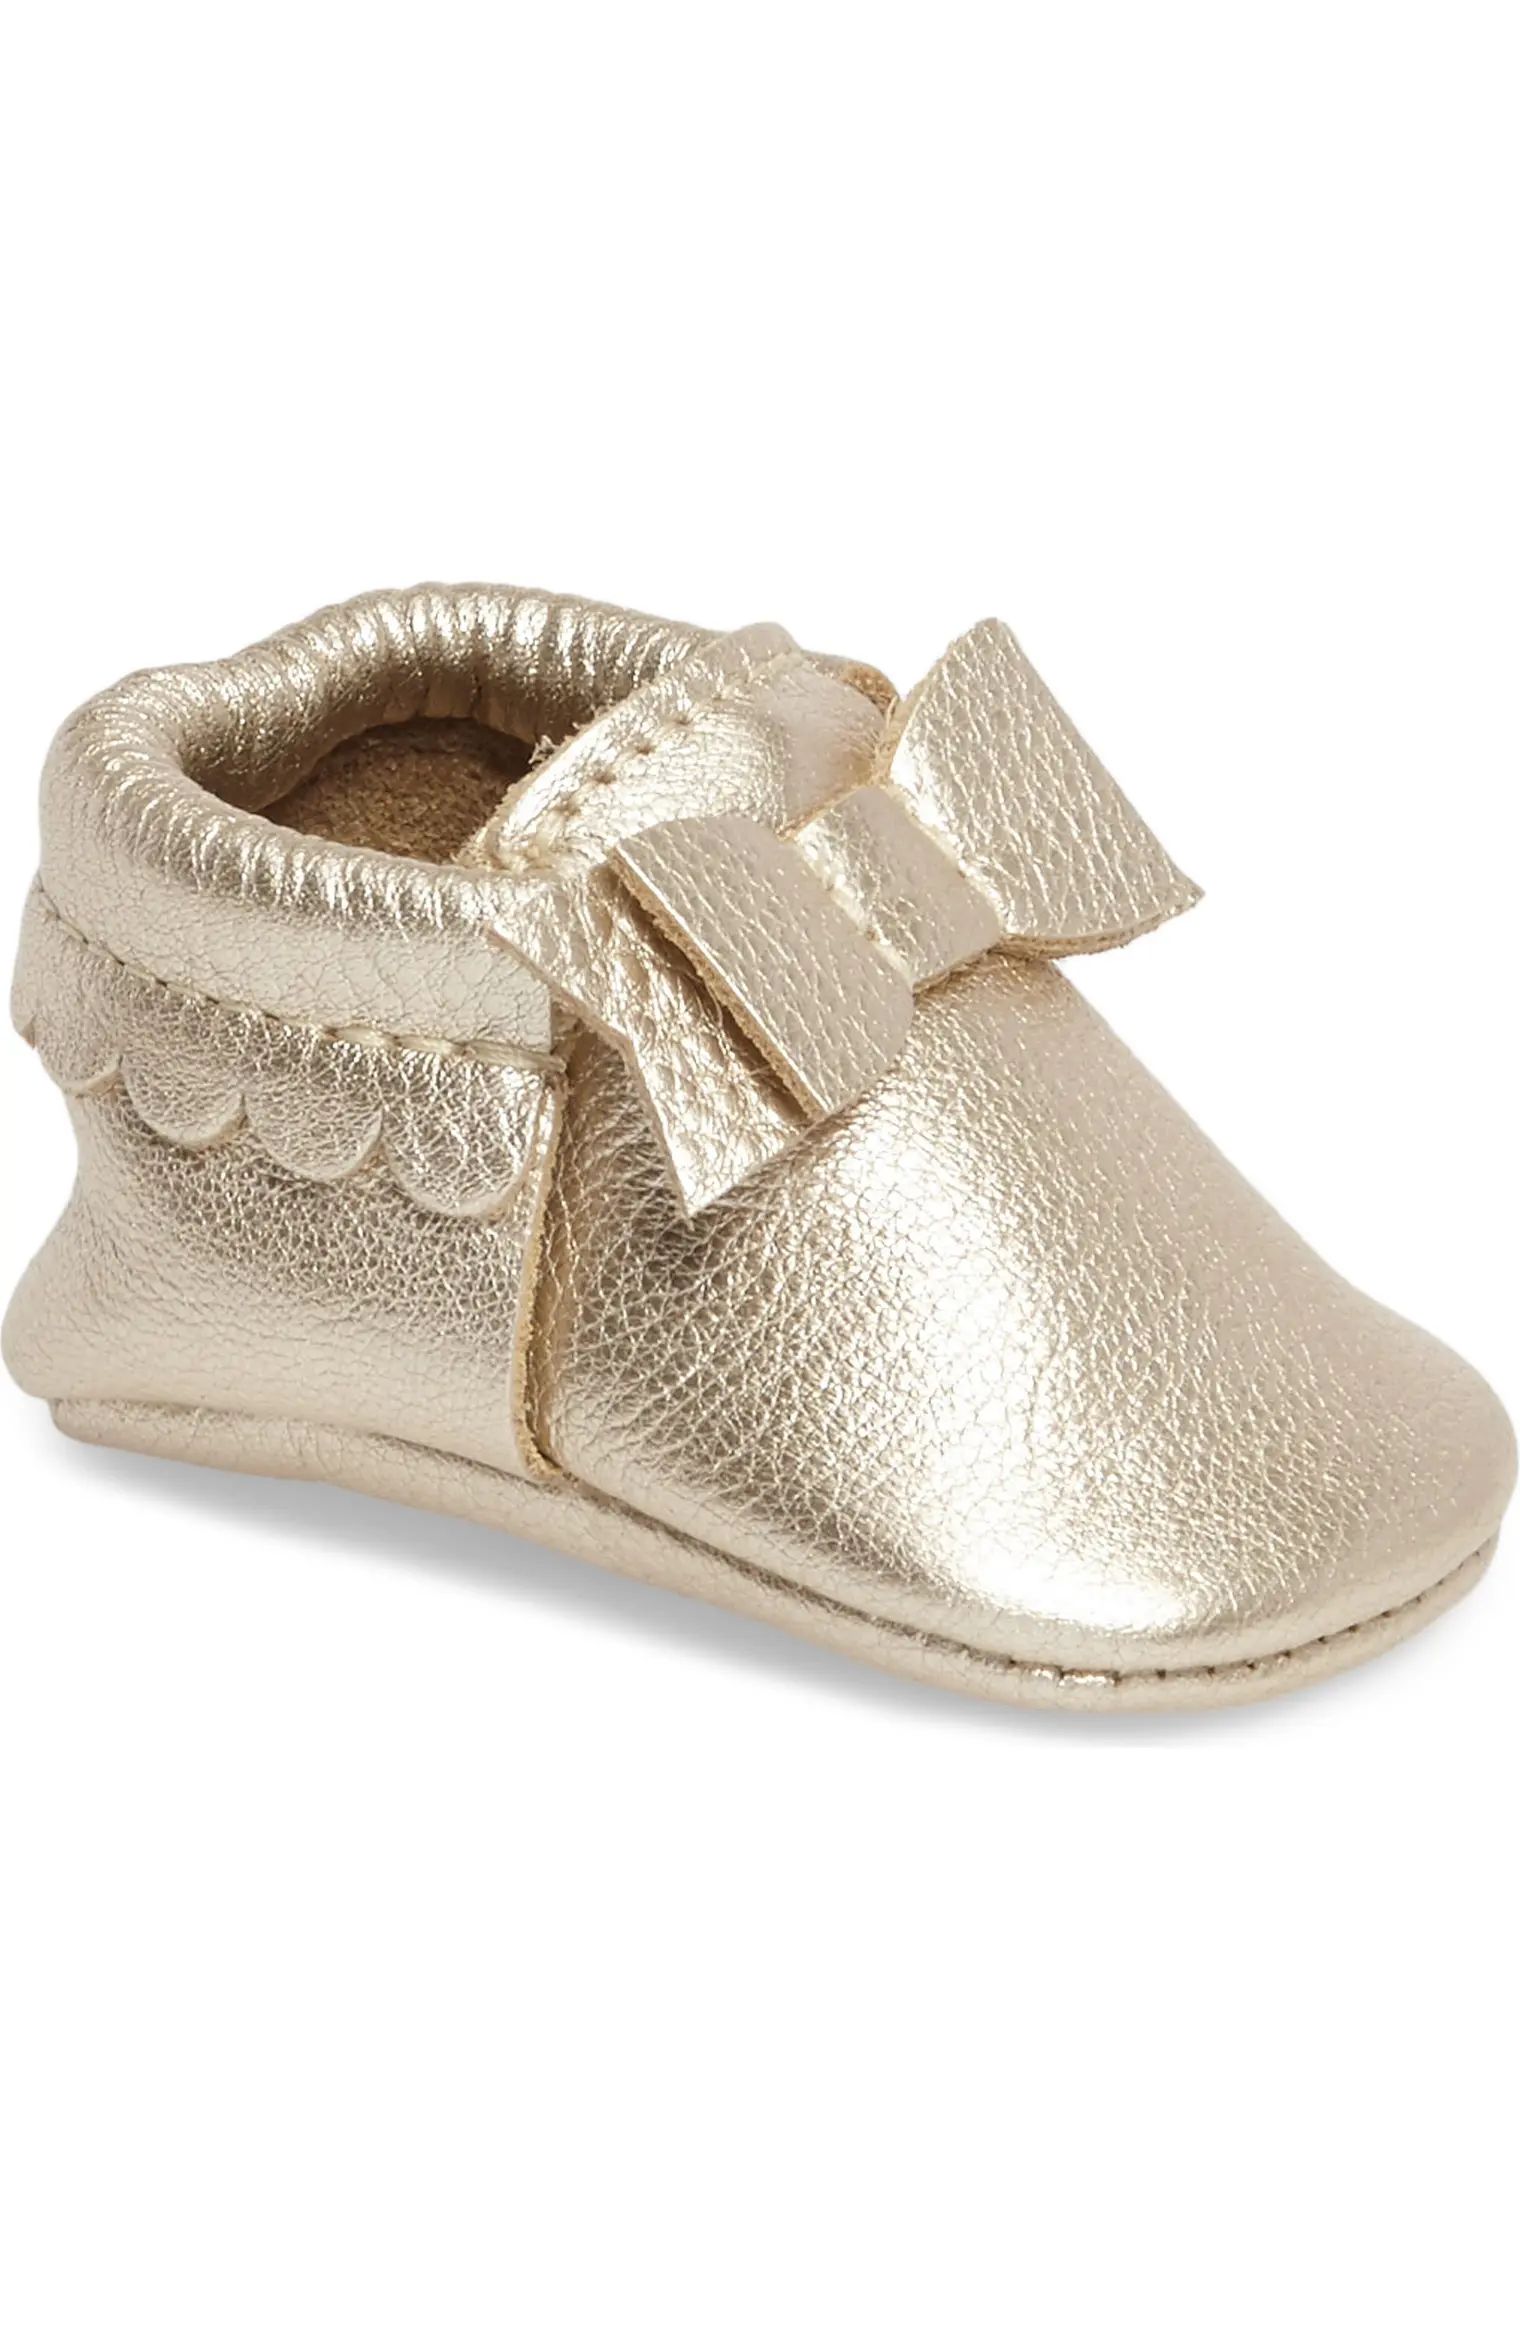 Metallic Bow Moccasin | Nordstrom